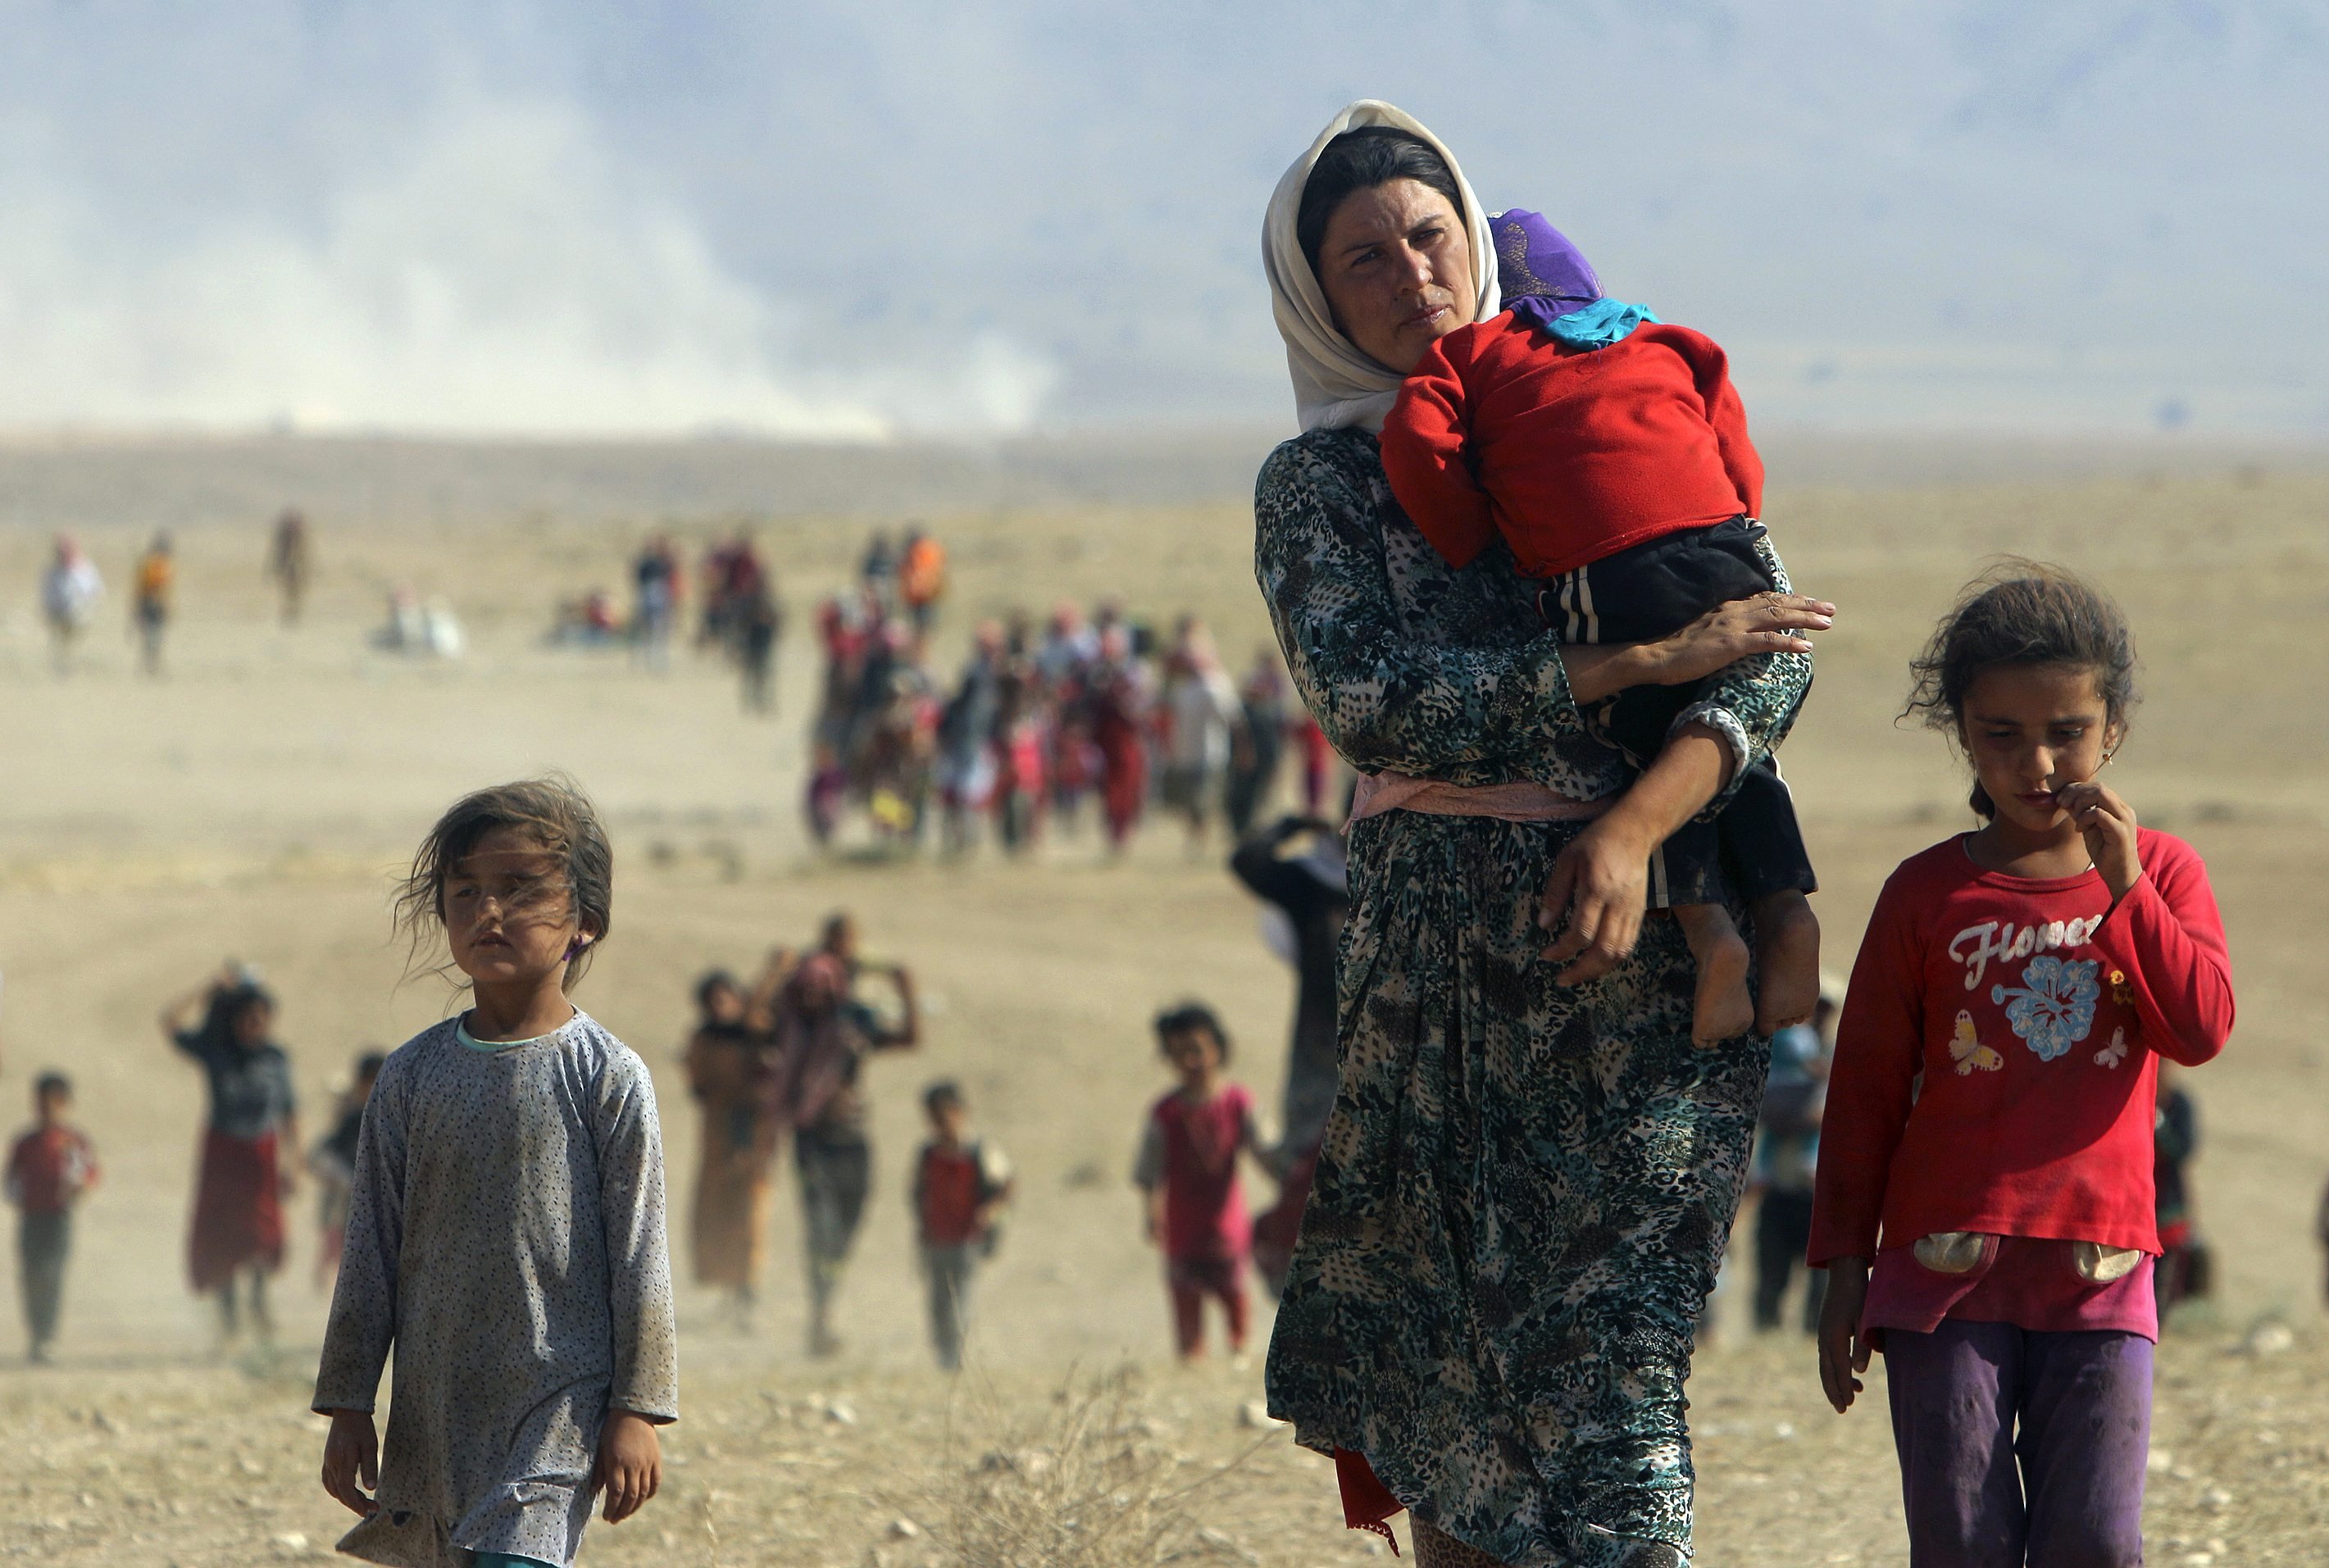 Displaced people from the minority Yazidi sect, fleeing violence from forces loyal to the Islamic State in Sinjar town, walk towards the Syrian border, on the outskirts of Sinjar mountain, near the Syrian border town of Elierbeh of Al-Hasakah Governorate on August 11, 2014.